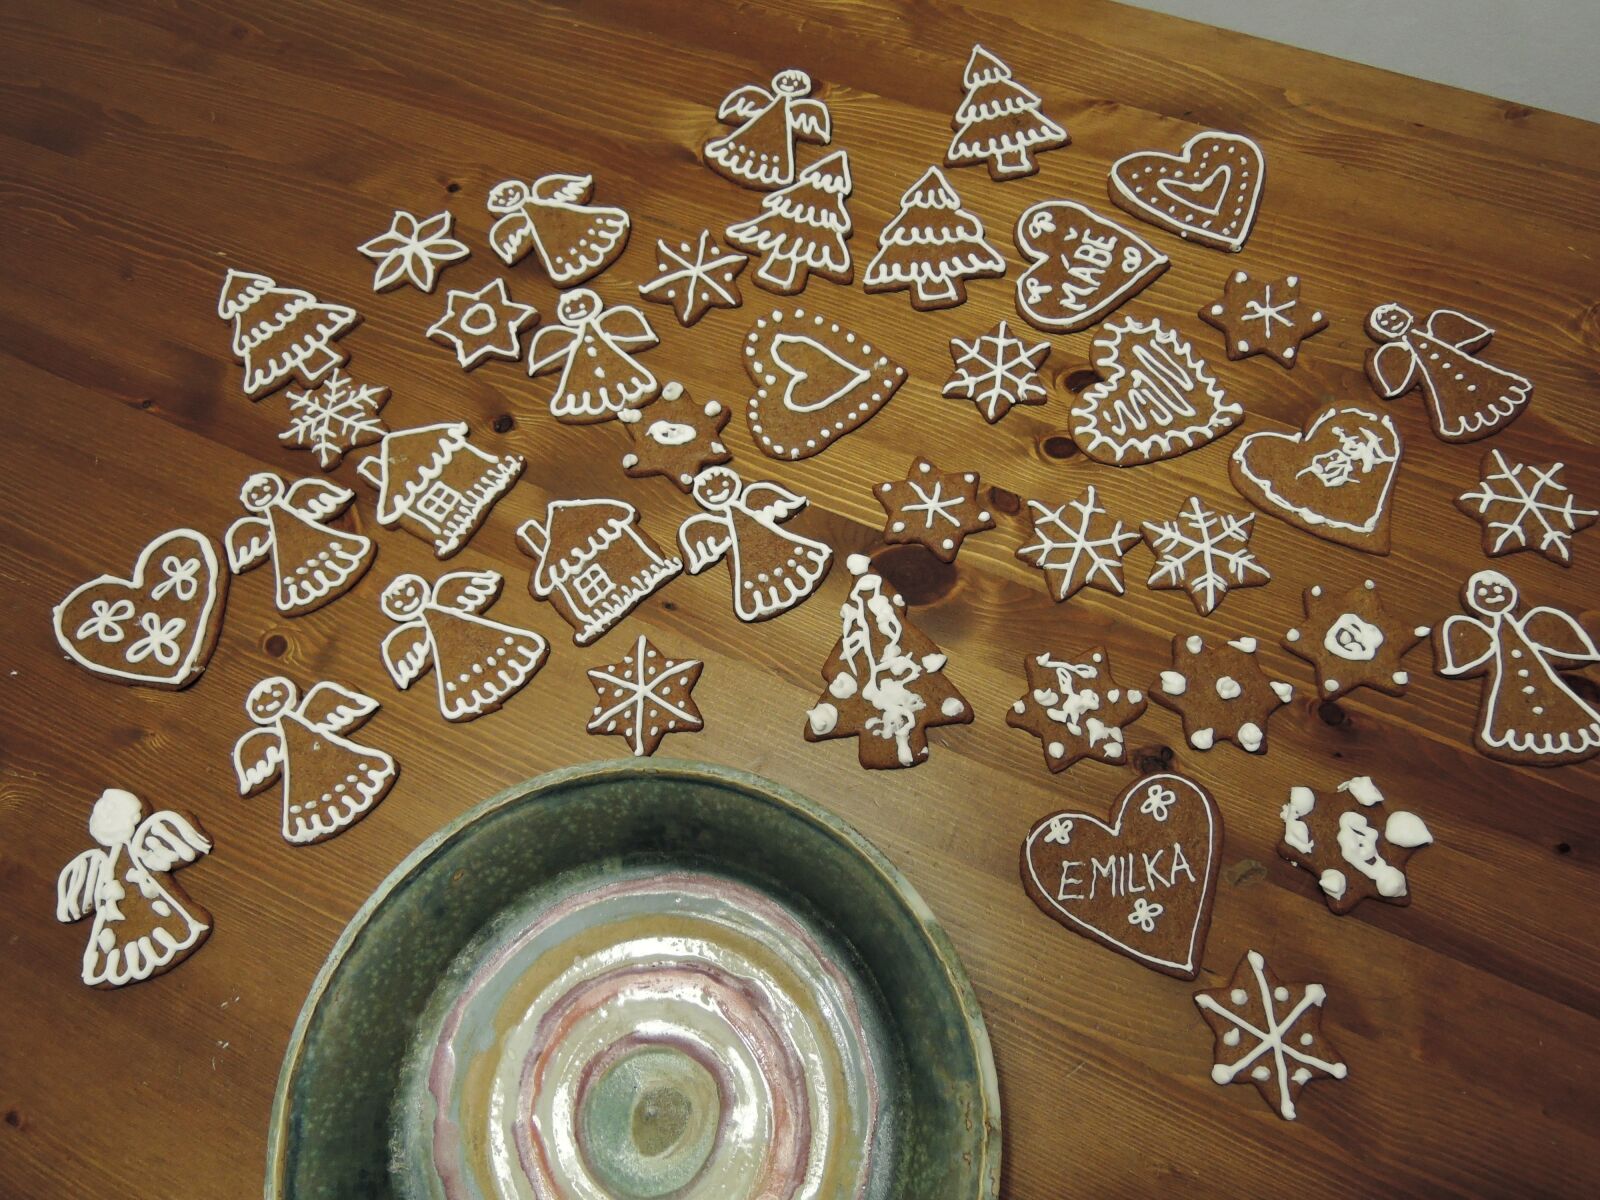 Nikon Coolpix P340 sample photo. The gingerbread, christmas, painted photography